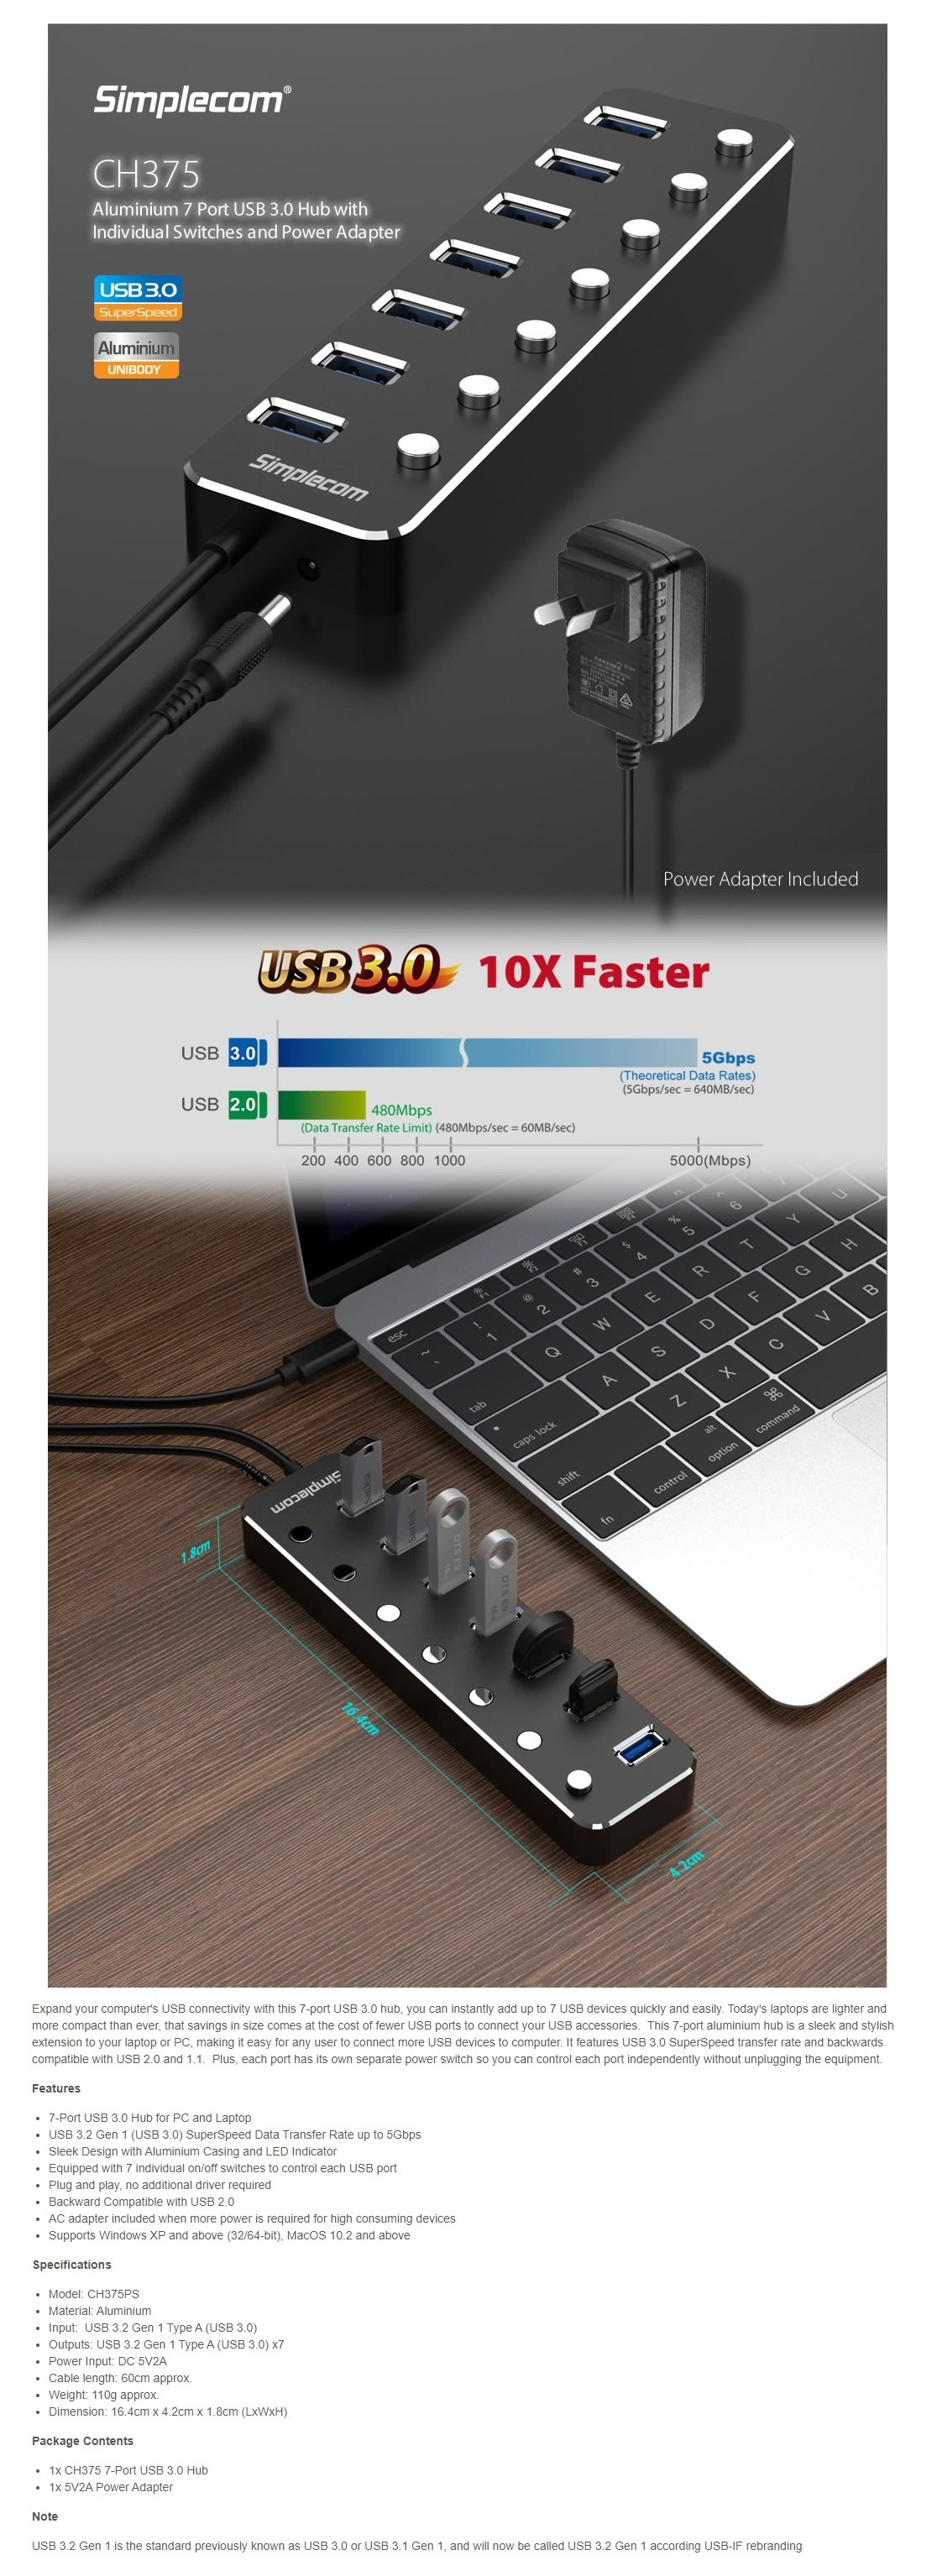 A large marketing image providing additional information about the product Simplecom CH375PS 7 Port USB 3.0 Hub with Individual Switches - Additional alt info not provided